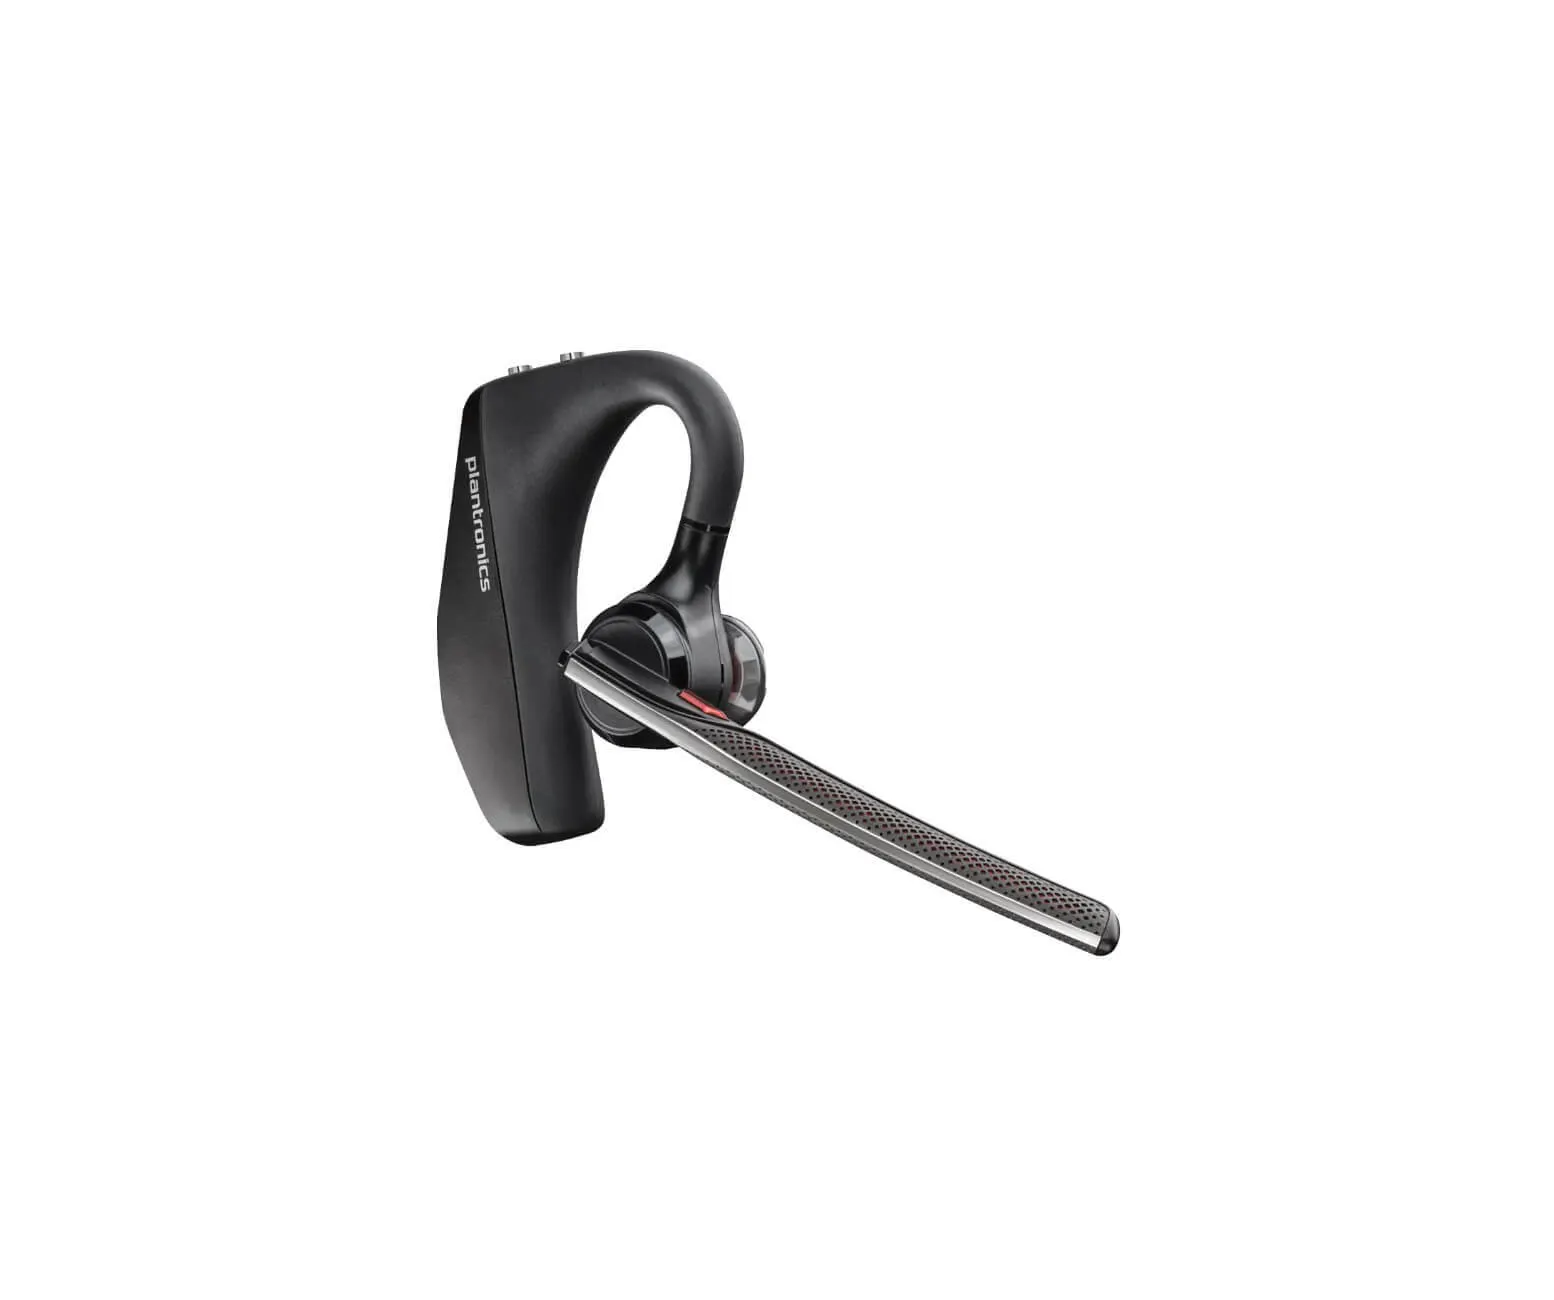 Poly Voyager 5200 UC bluetooth headset